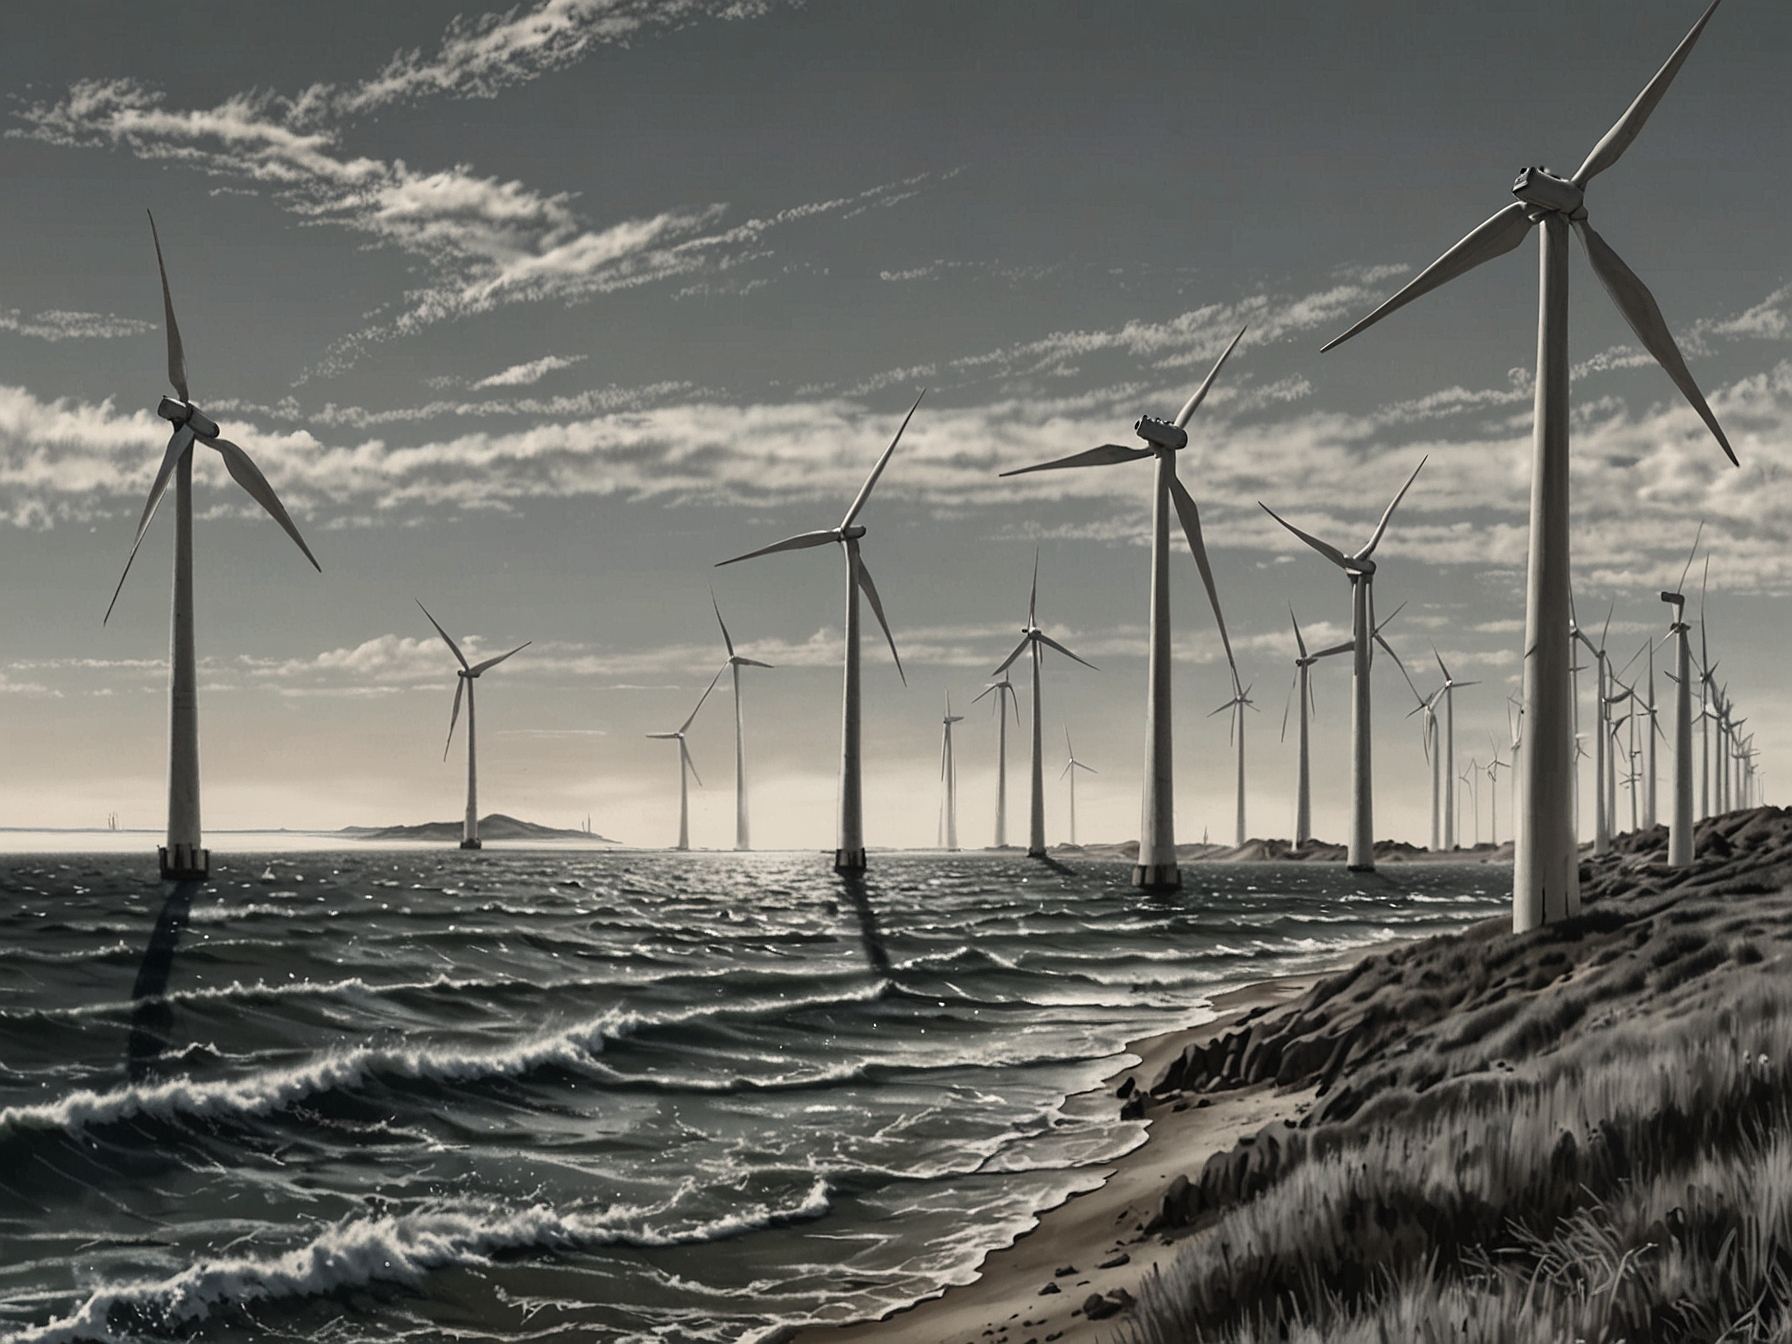 A panoramic view of Vineyard Wind 1 offshore wind farm near Martha's Vineyard, showing rows of 84 towering wind turbines harnessing the Atlantic Ocean’s wind resources.